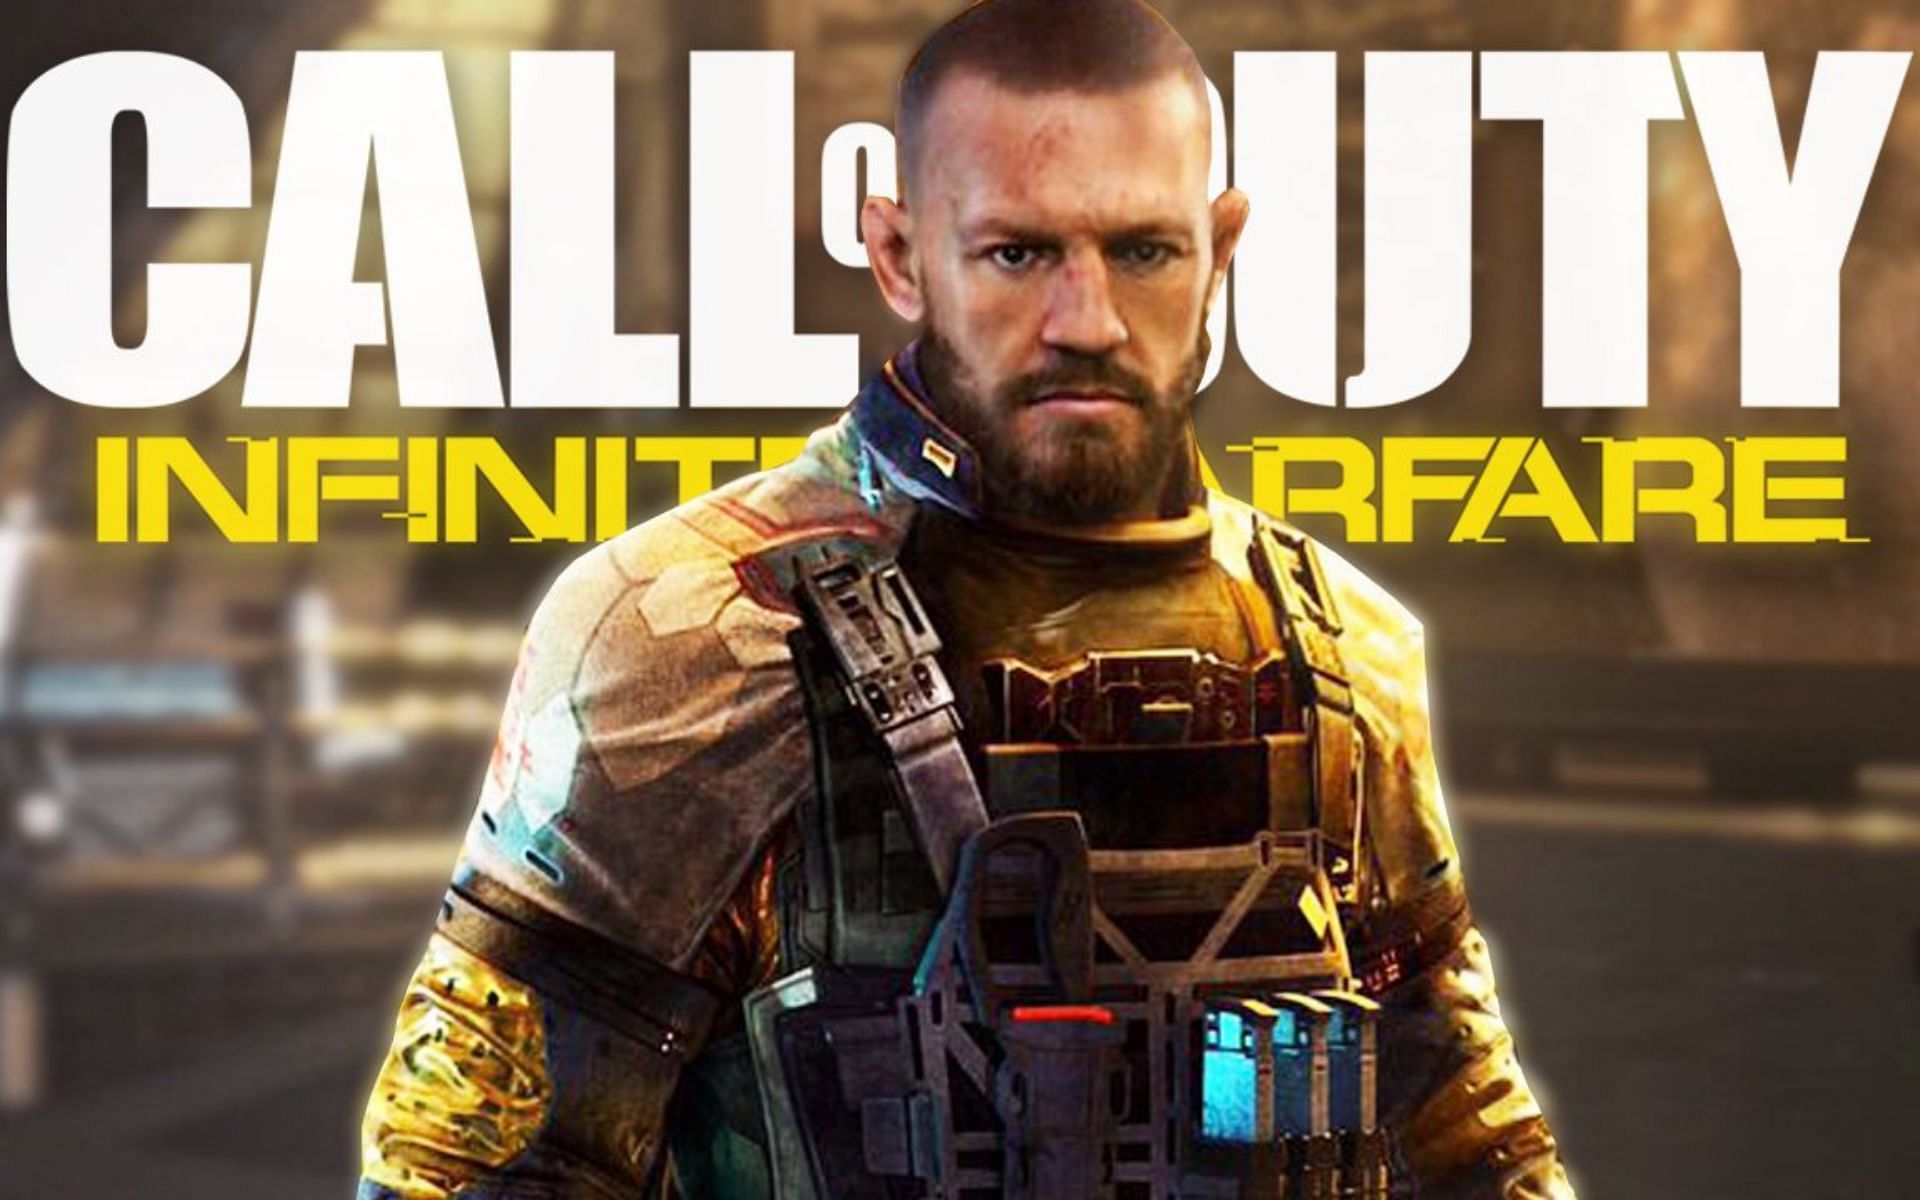 Which character did Conor McGregor voice in 'Call of Duty'?